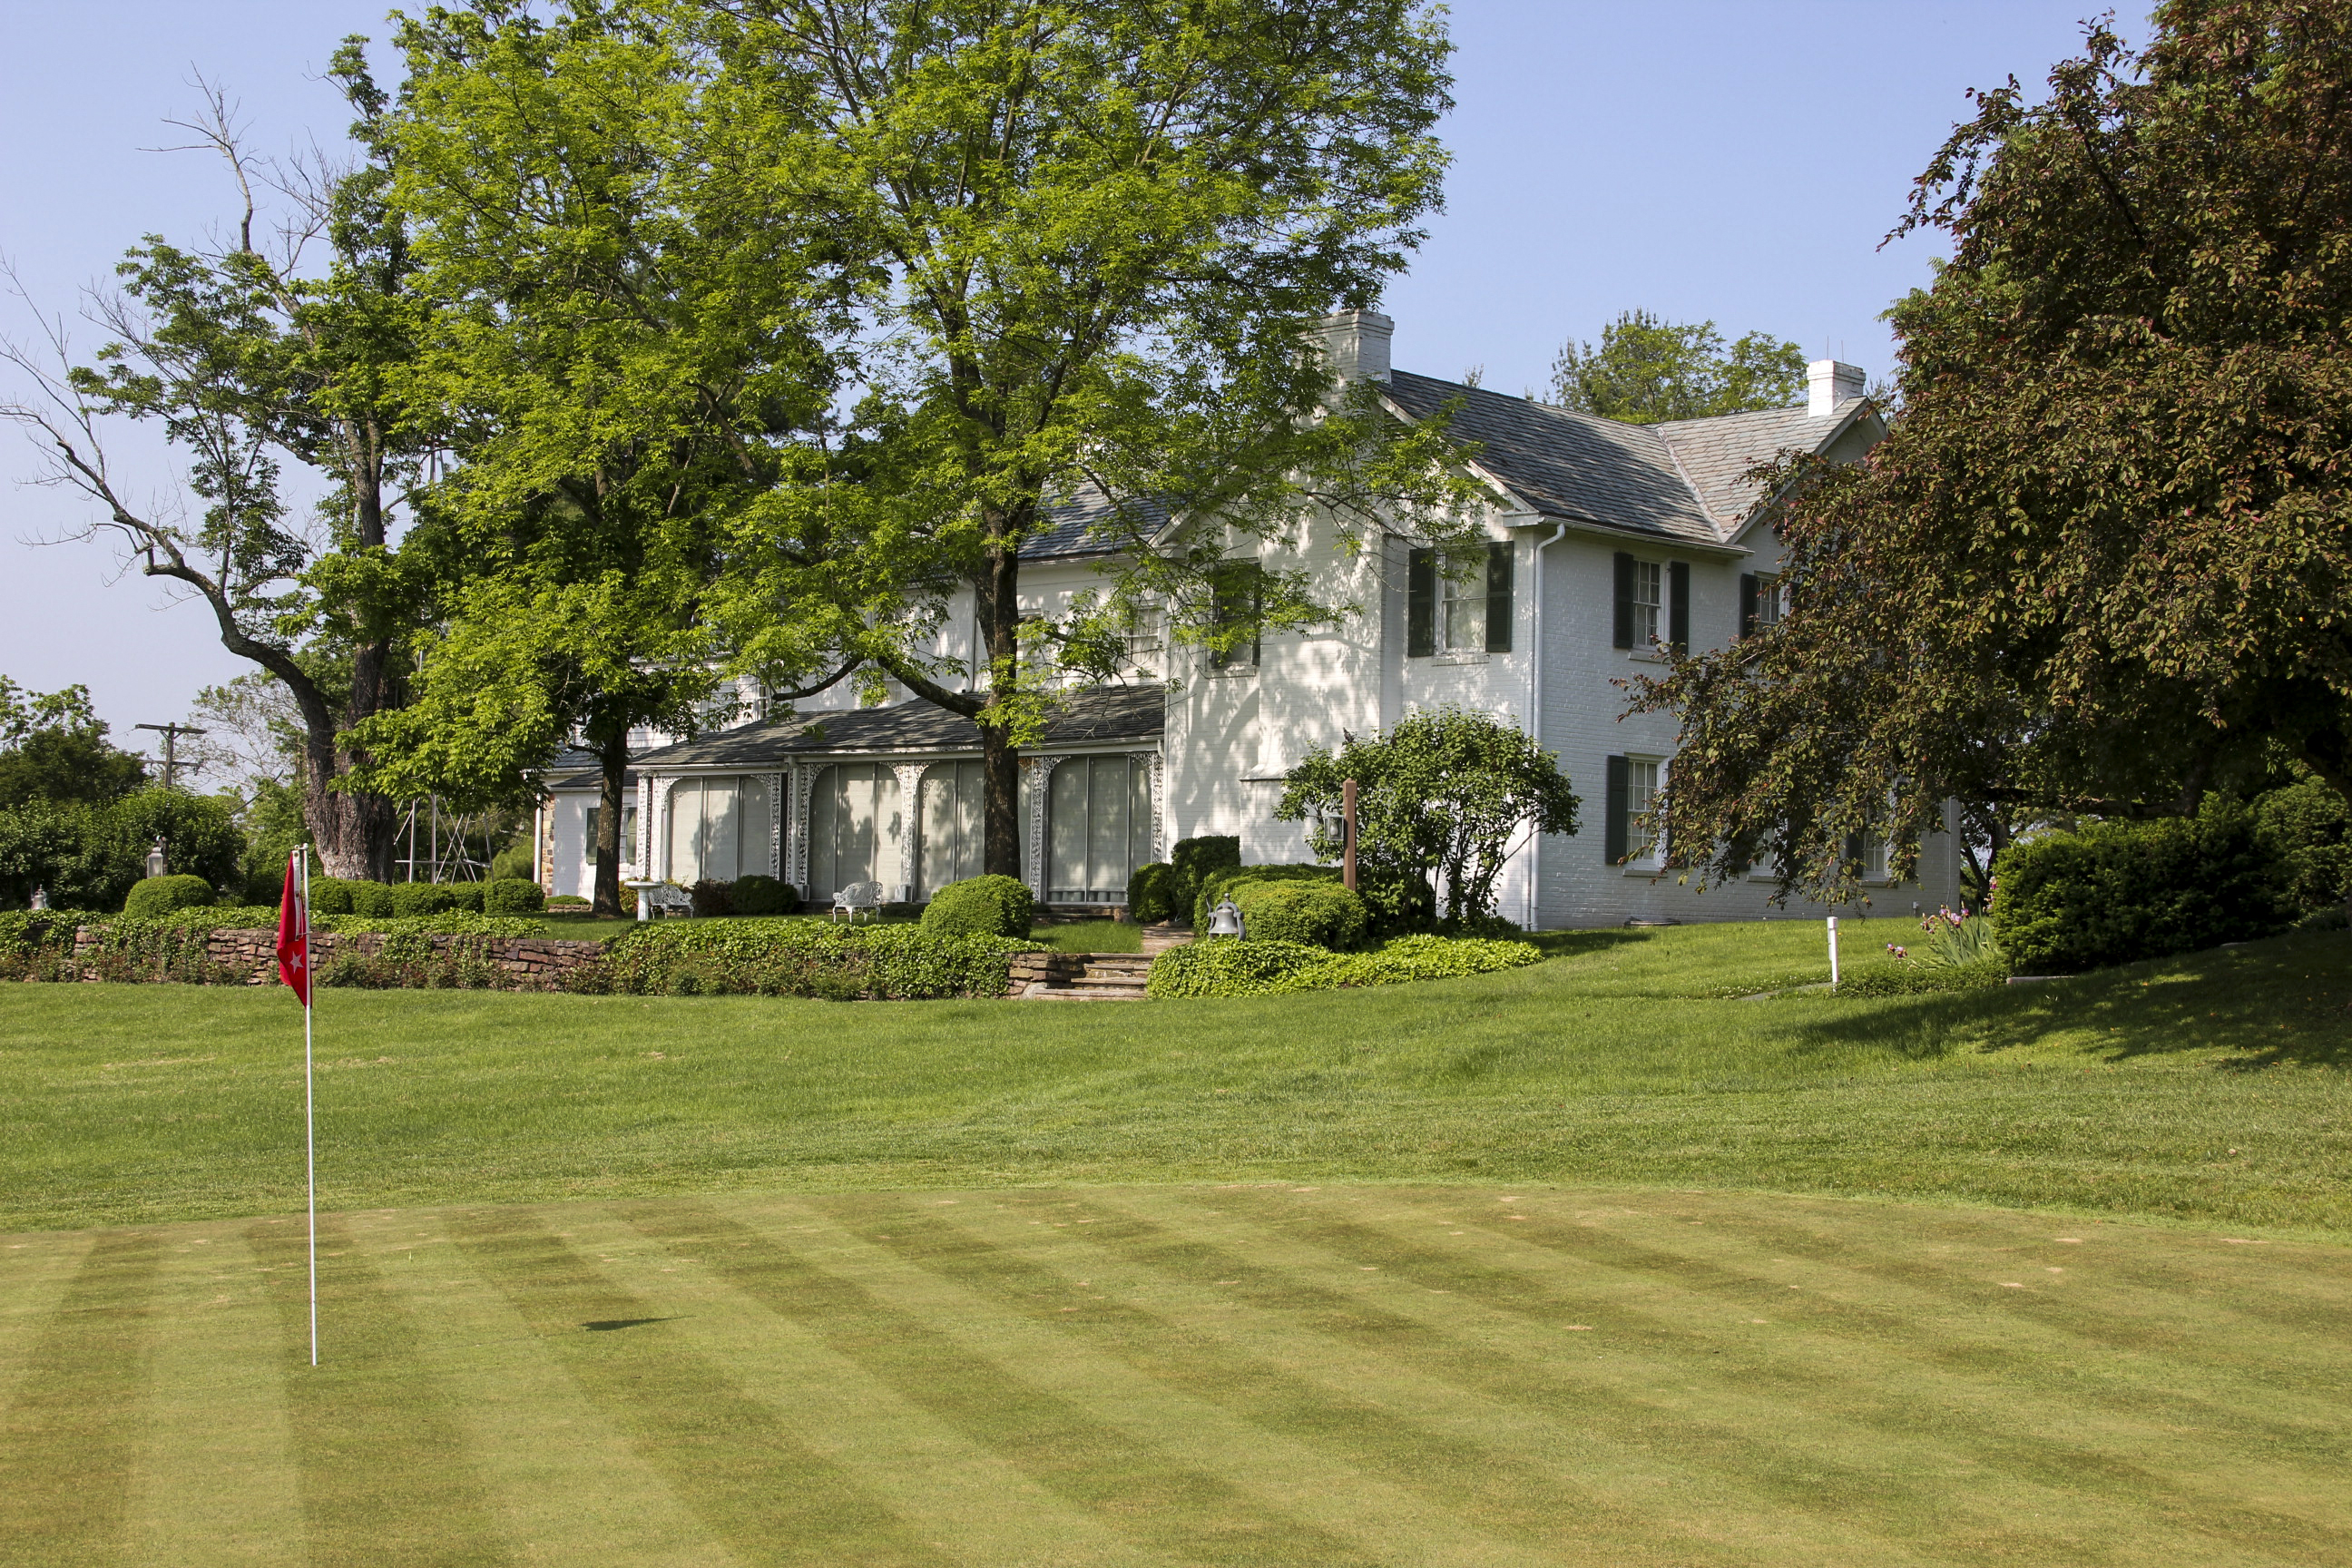 The Eisenhower home with Ike's putting green in the foreground